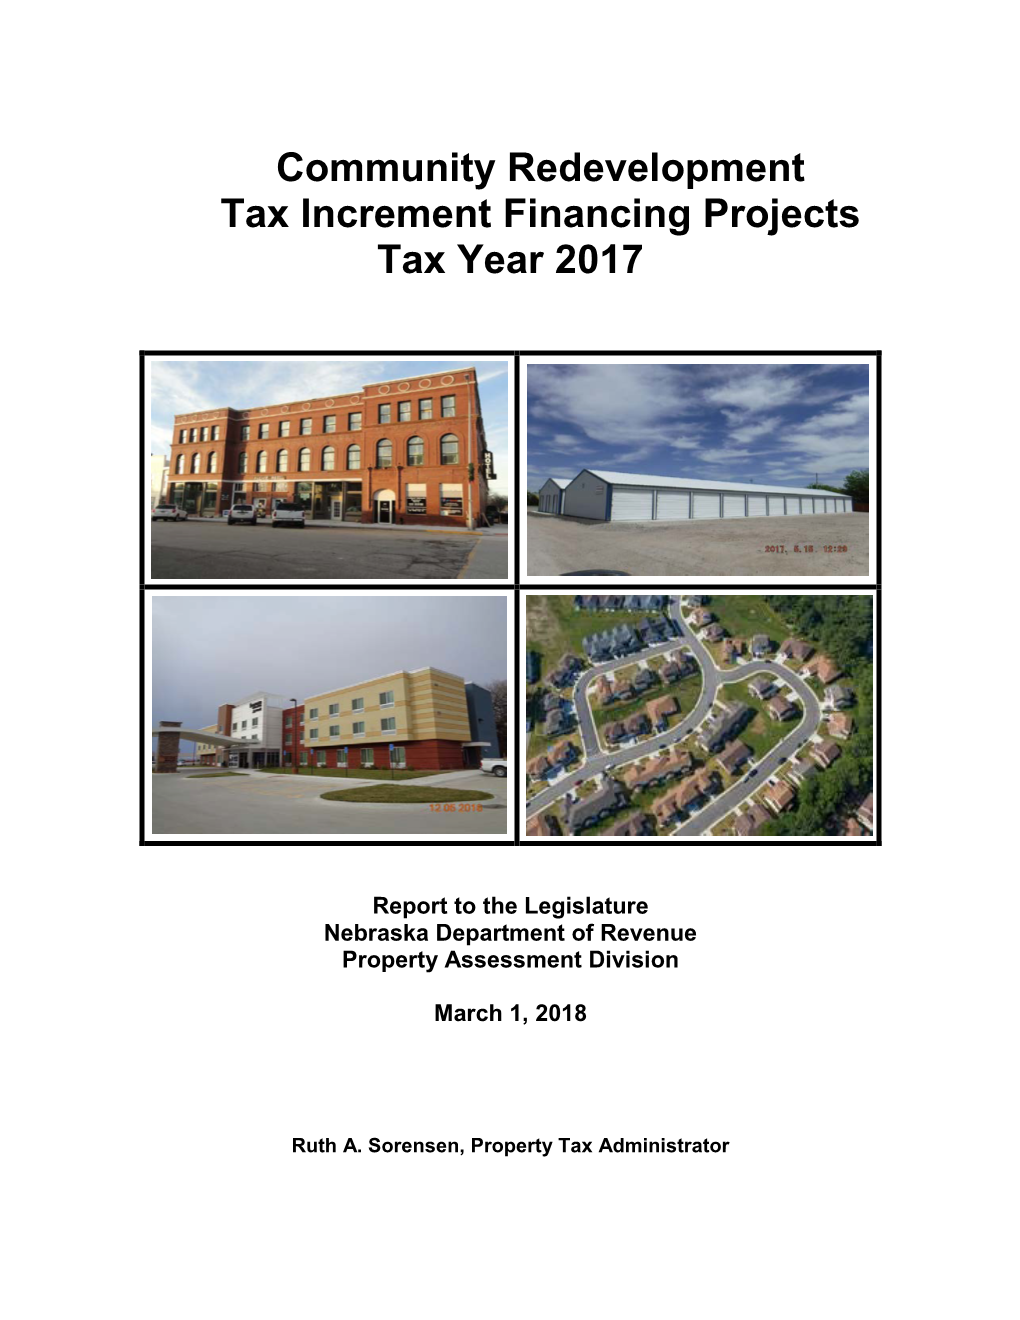 Community Redevelopment Tax Increment Financing Projects Tax Year 2017